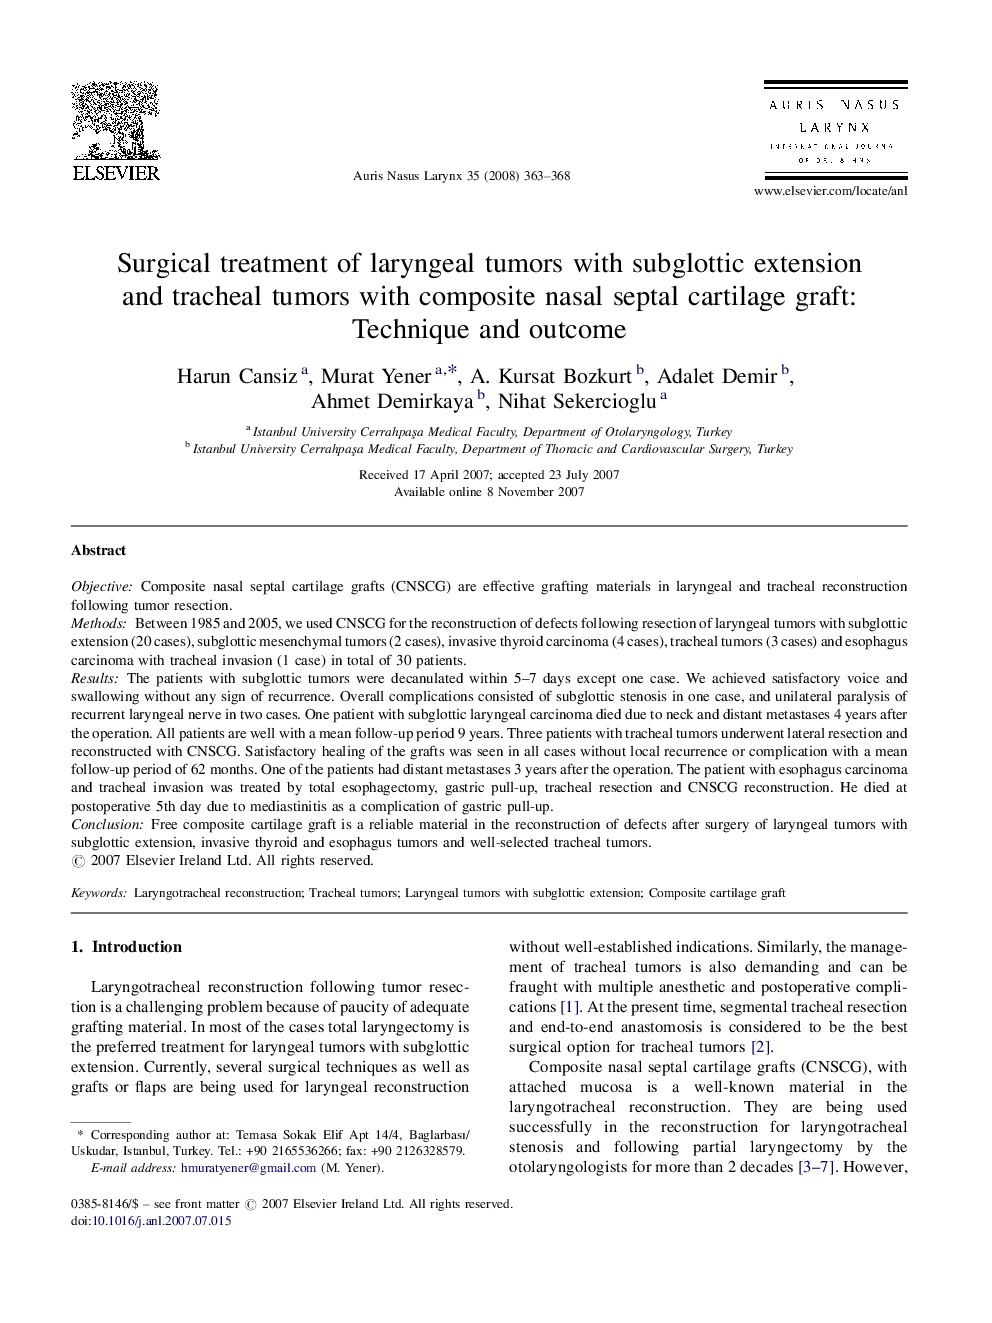 Surgical treatment of laryngeal tumors with subglottic extension and tracheal tumors with composite nasal septal cartilage graft: Technique and outcome